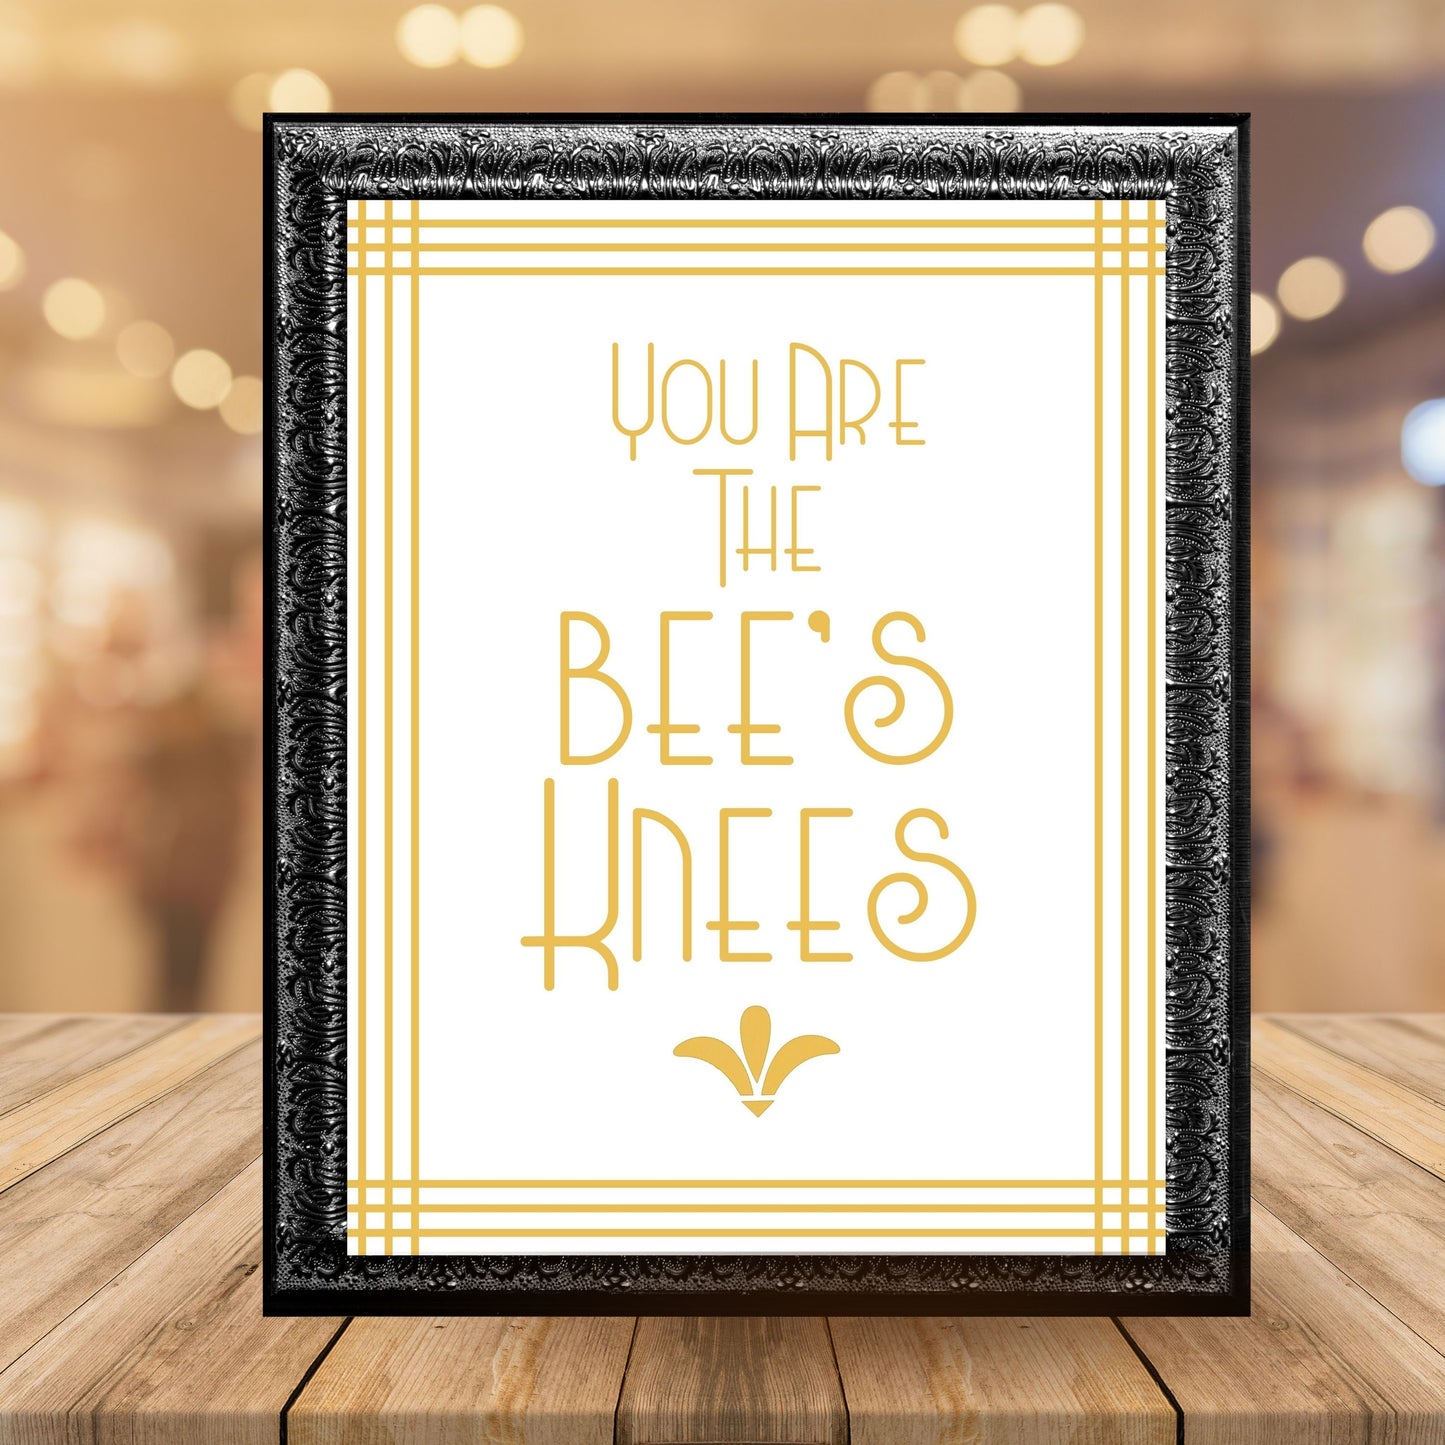 "You Are The Bee's Knees" Printable Party Sign For Great Gatsby or Roaring 20's Party Or Wedding, White & Gold, Printable Party Decor